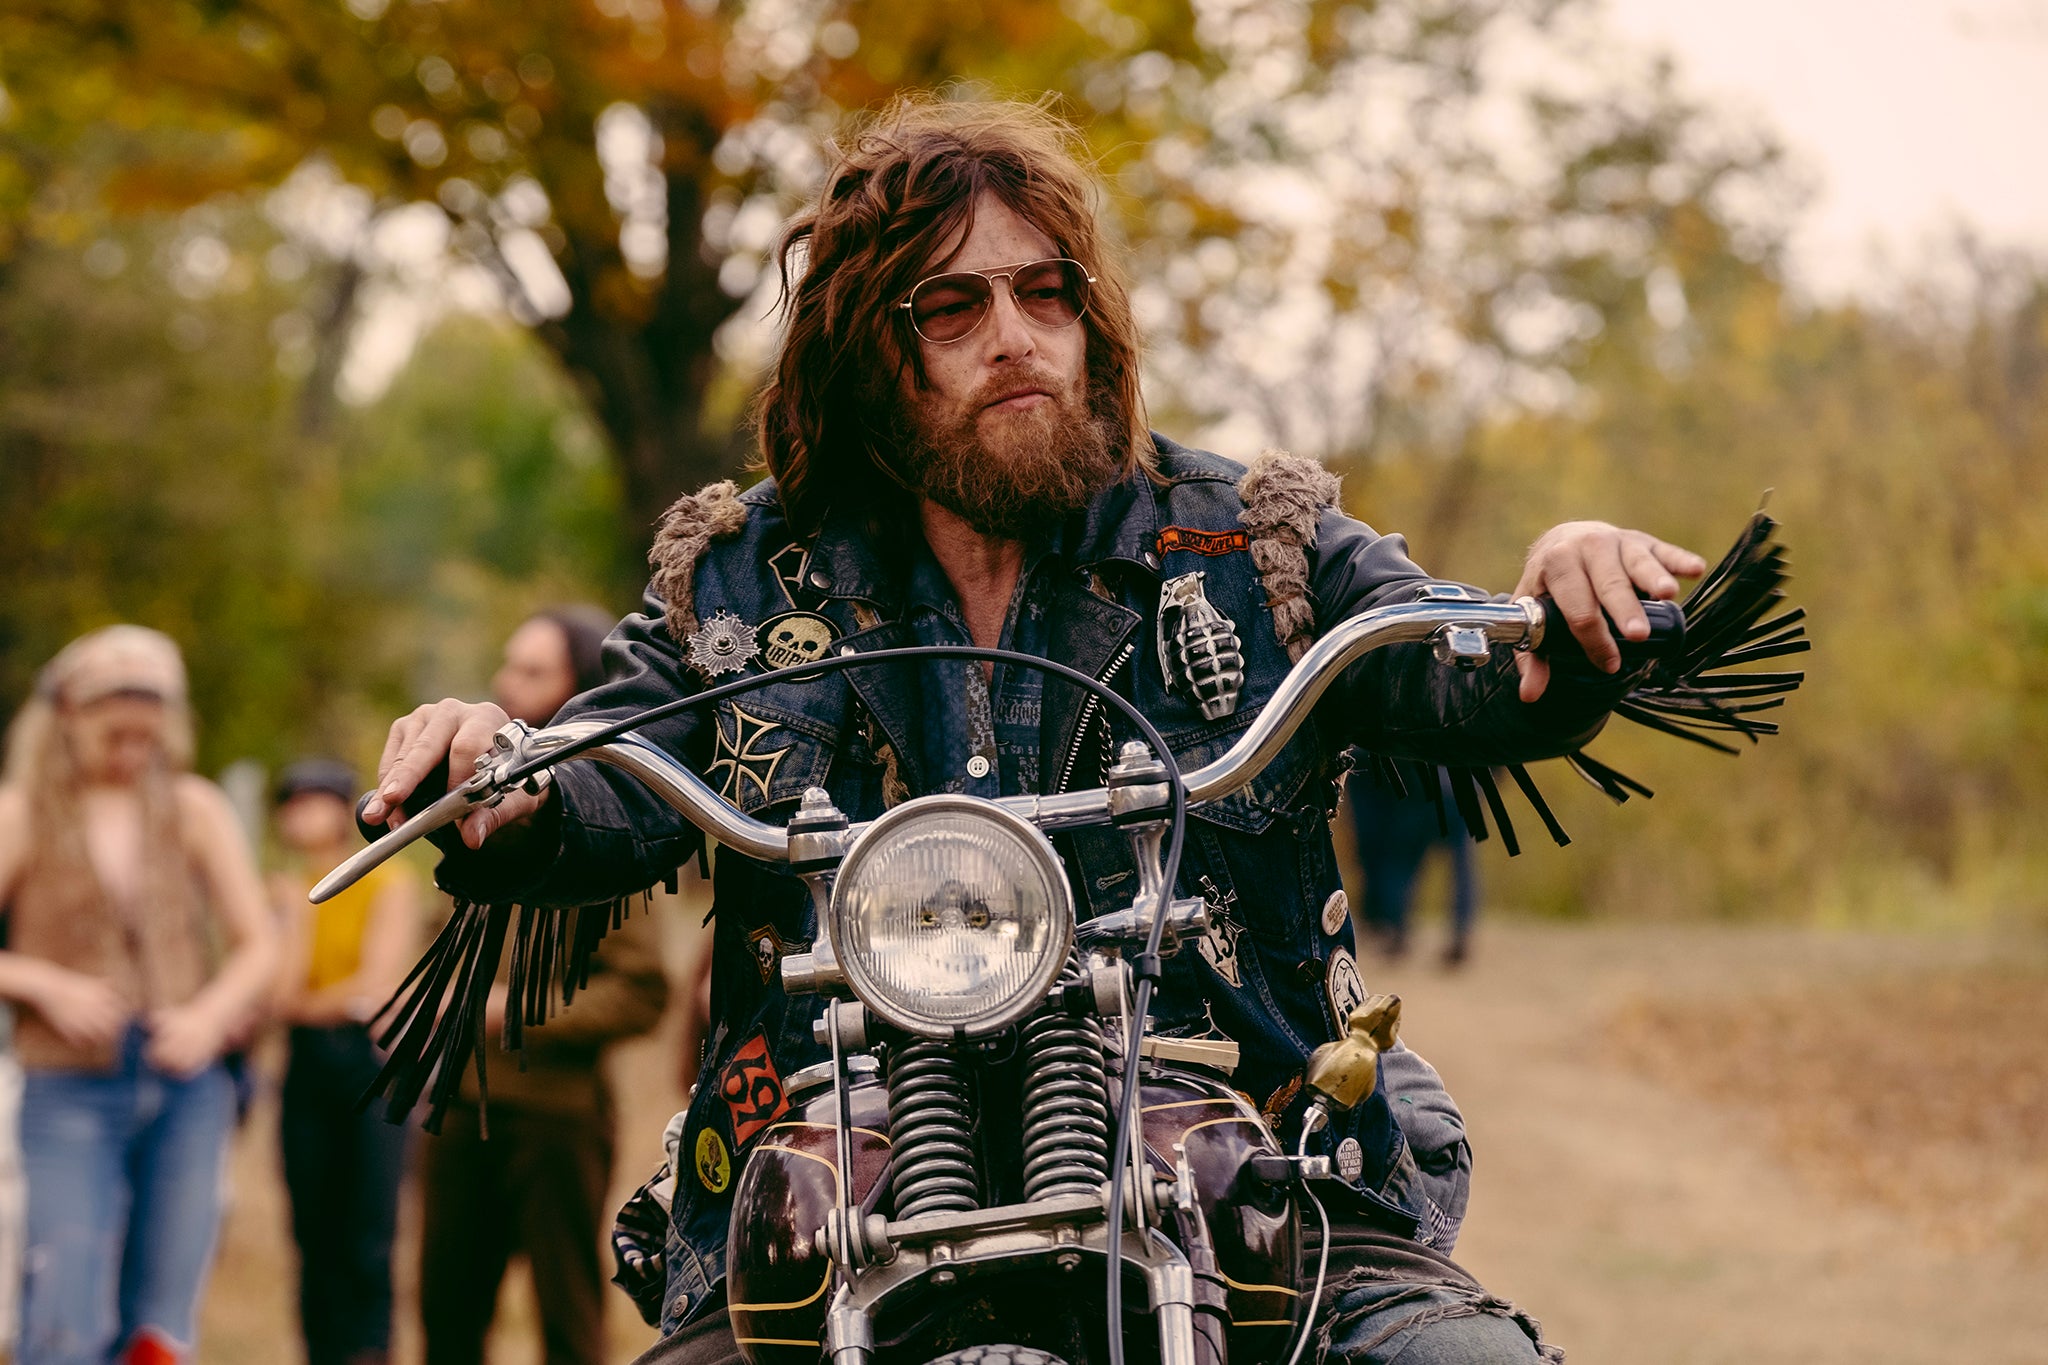 Hell for leather: Norman Reedus in ‘The Bikeriders’